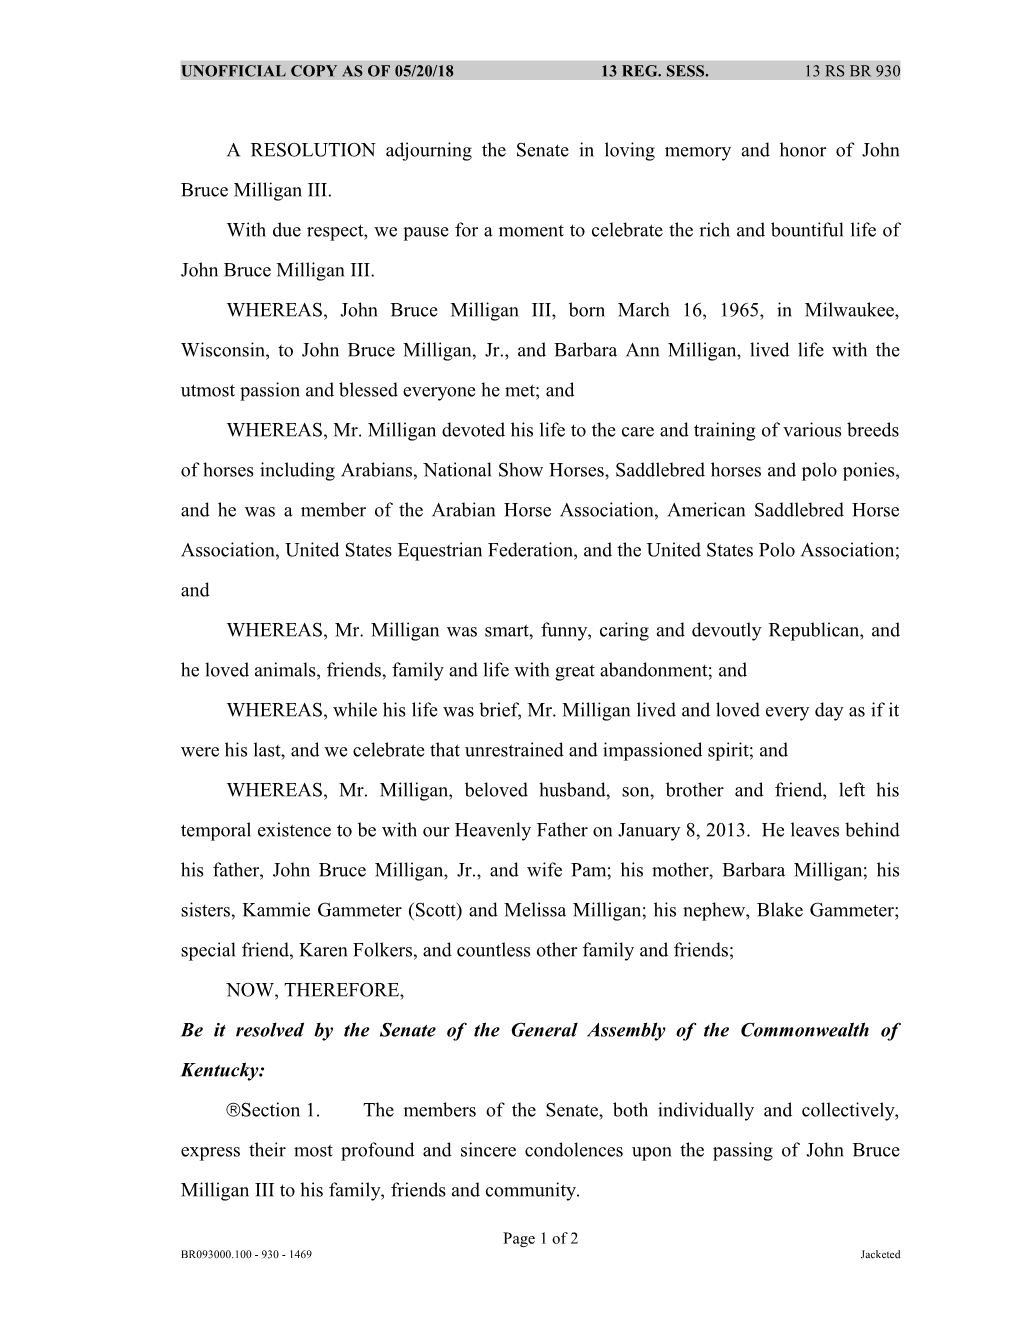 A RESOLUTION Adjourning the Senate in Loving Memory and Honor of John Bruce Milligan III